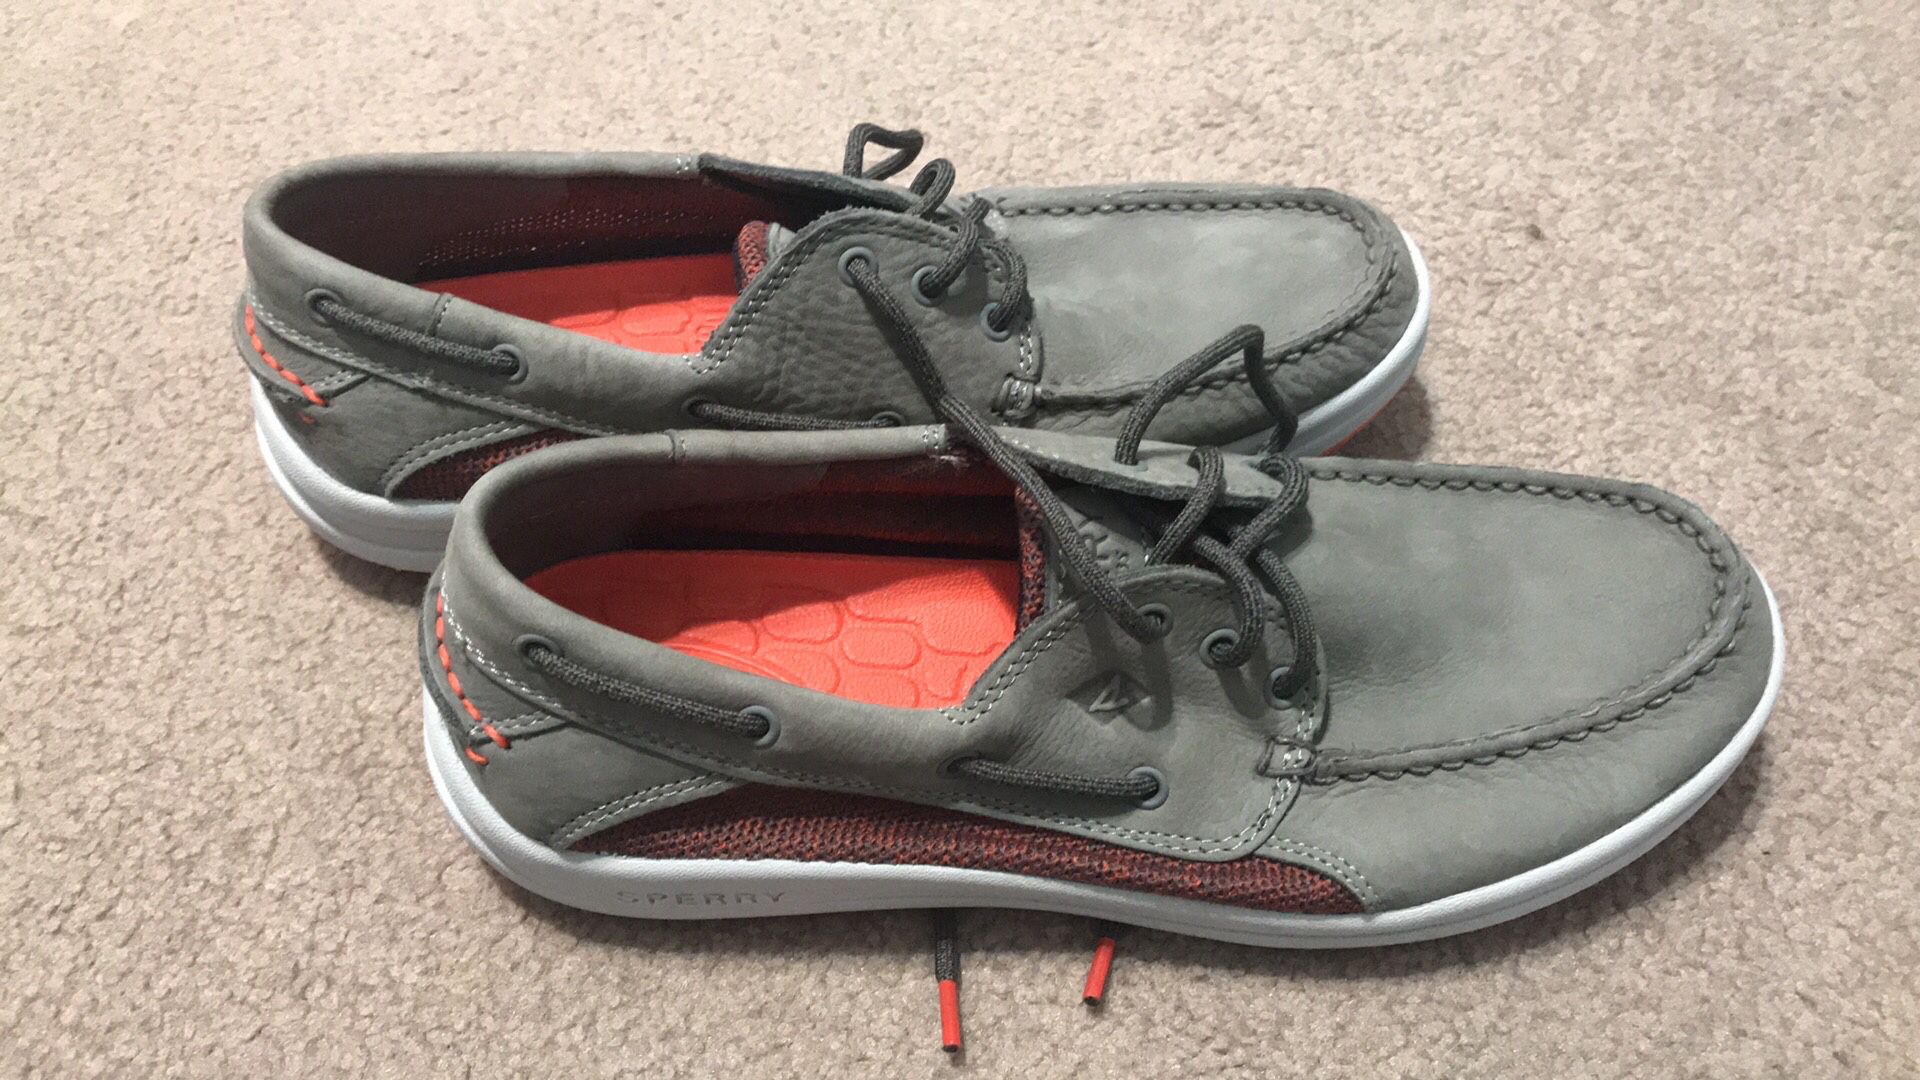 Men's Sperry Top-Sider Gamefish 3-Eye Boat Shoe Grey Leather. 9.5